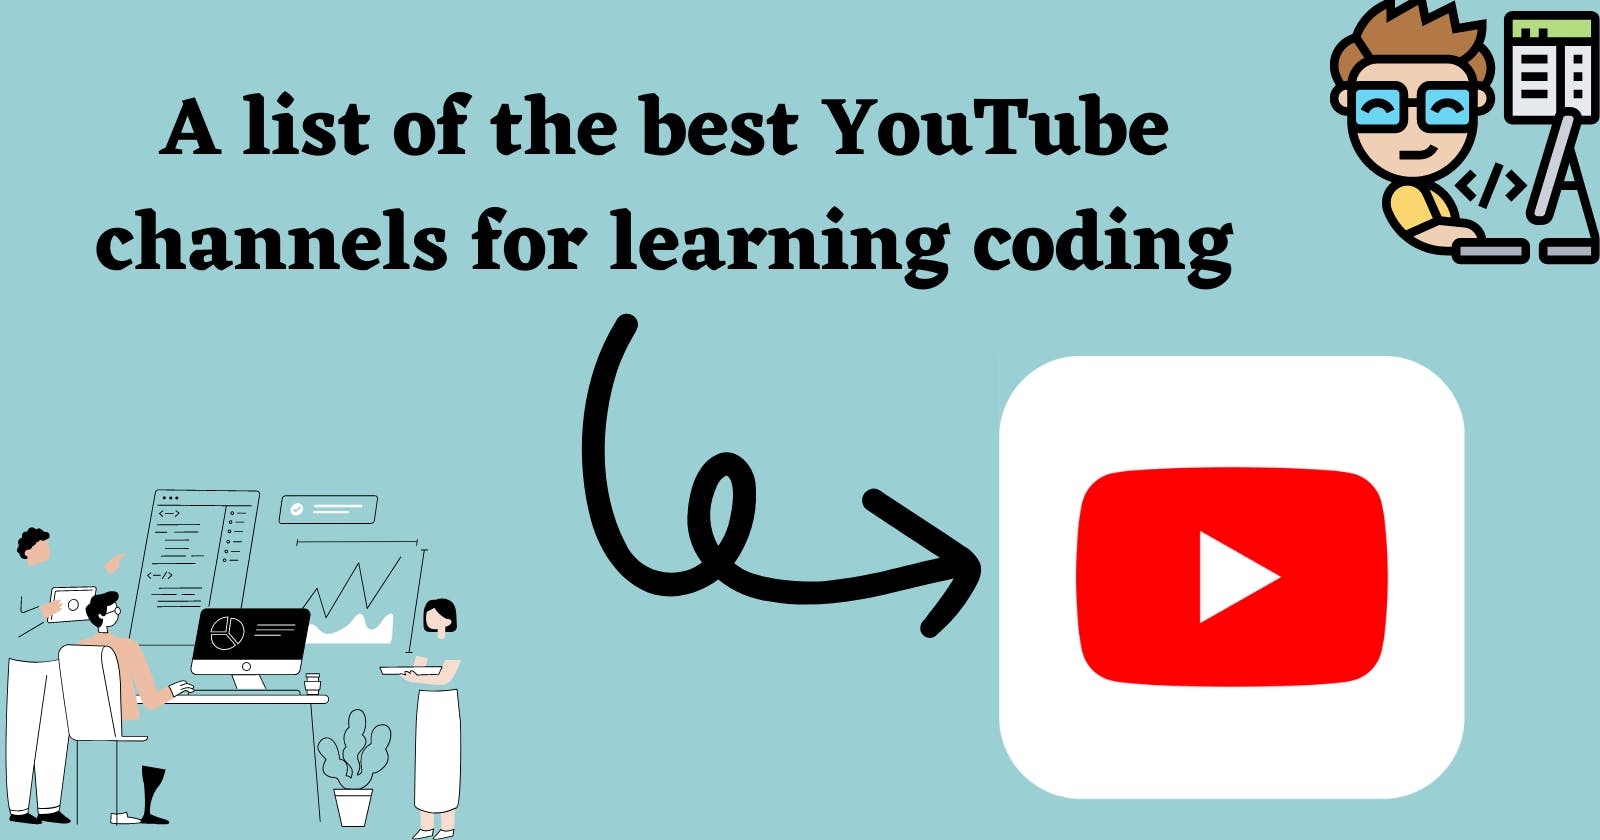 A list of the best YouTube channels for learning coding </>